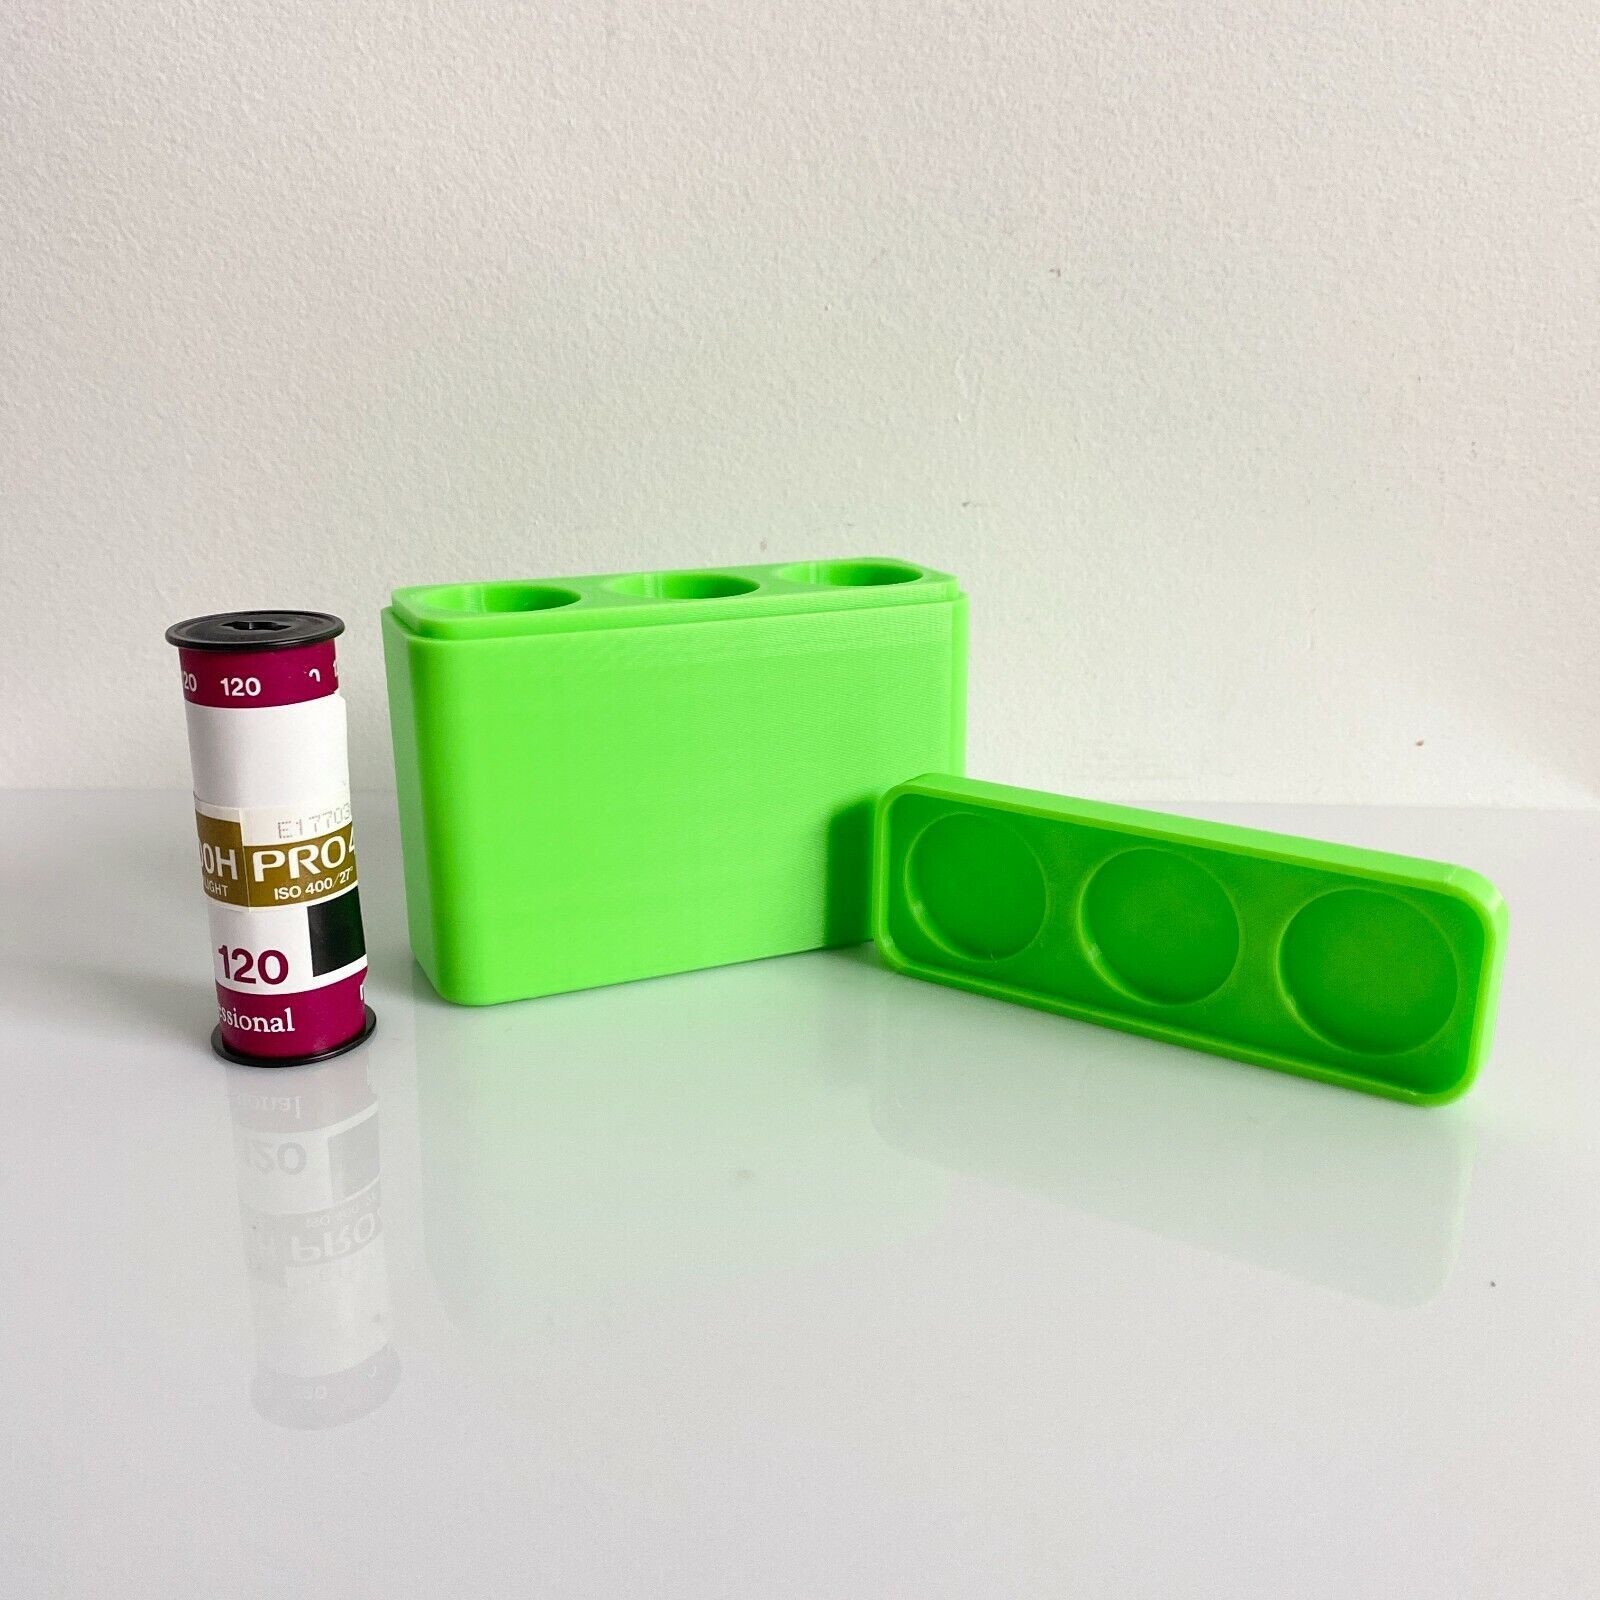 120mm Film 88％以上節約 holder storage container N Printed Green. [ギフト/プレゼント/ご褒美] - 3D